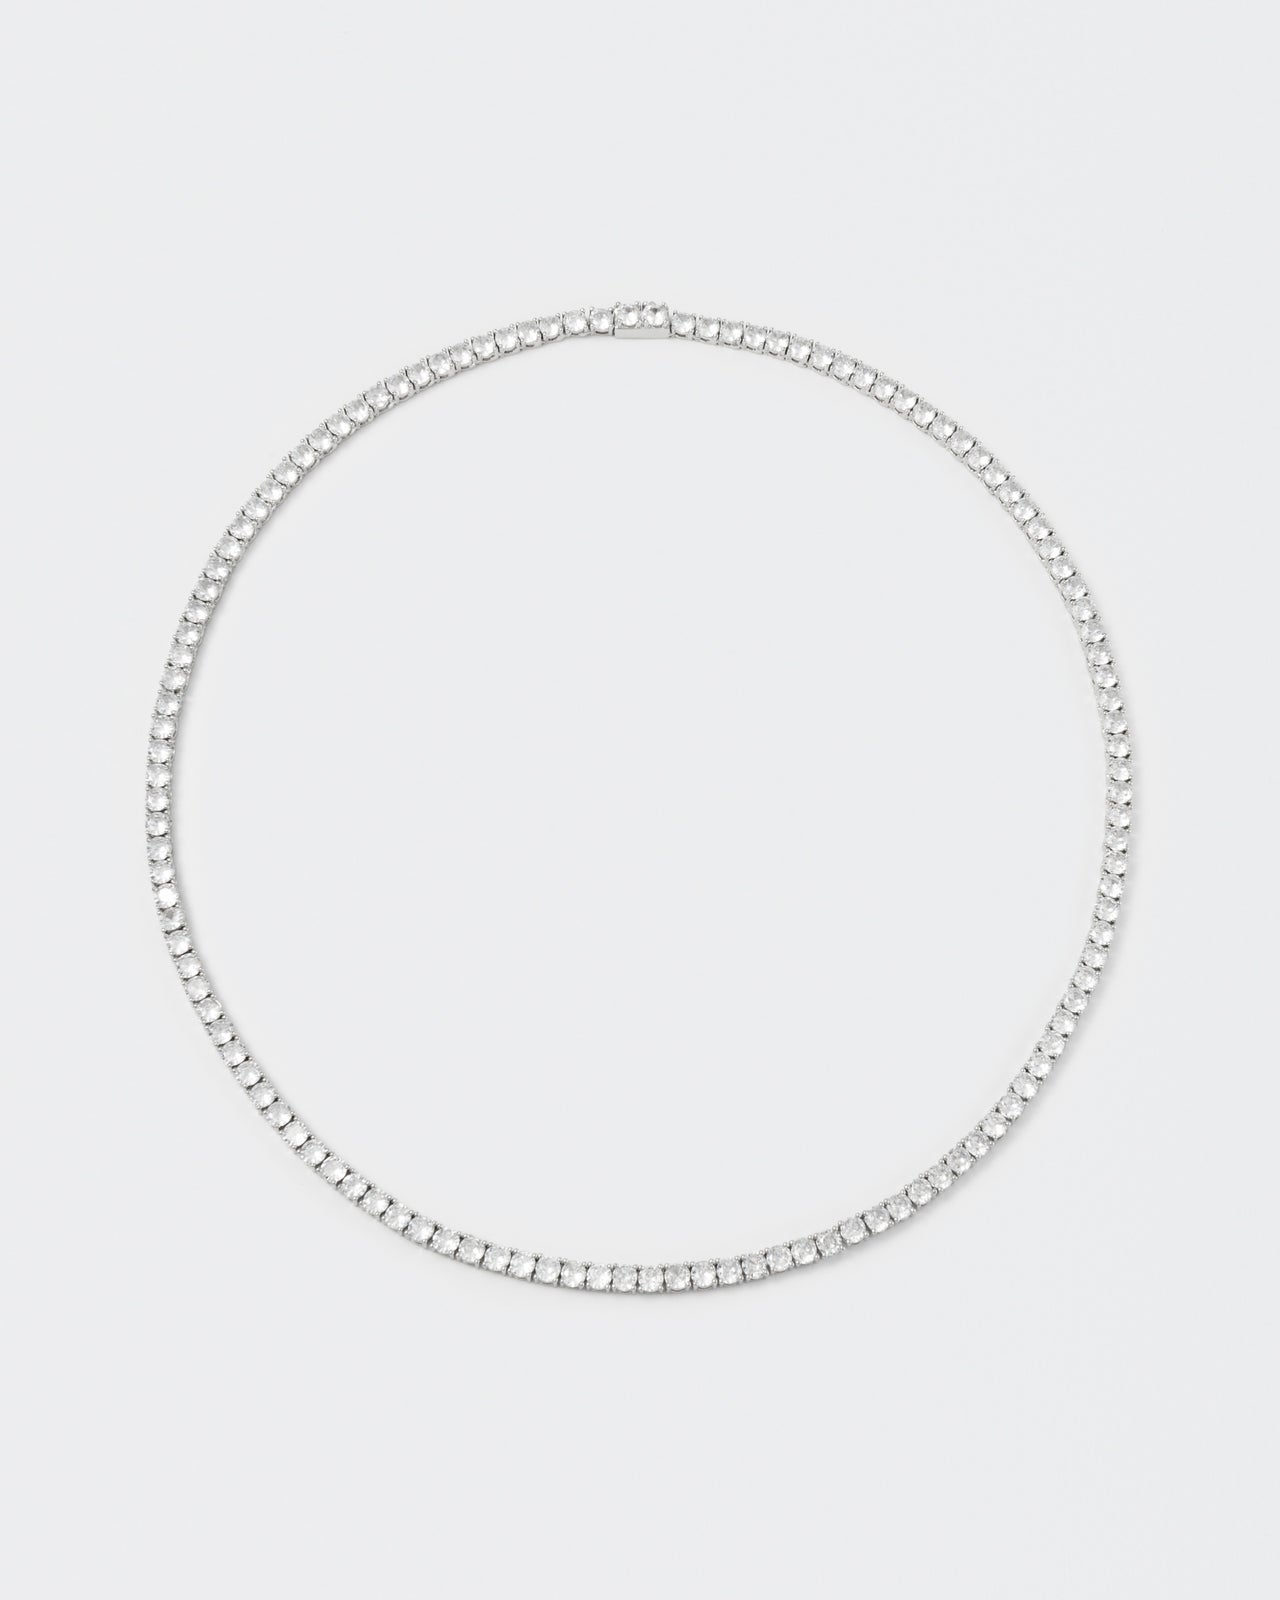 tennis necklace with 18kt white gold coating and hand-set round brilliant-cut stones in diamond white